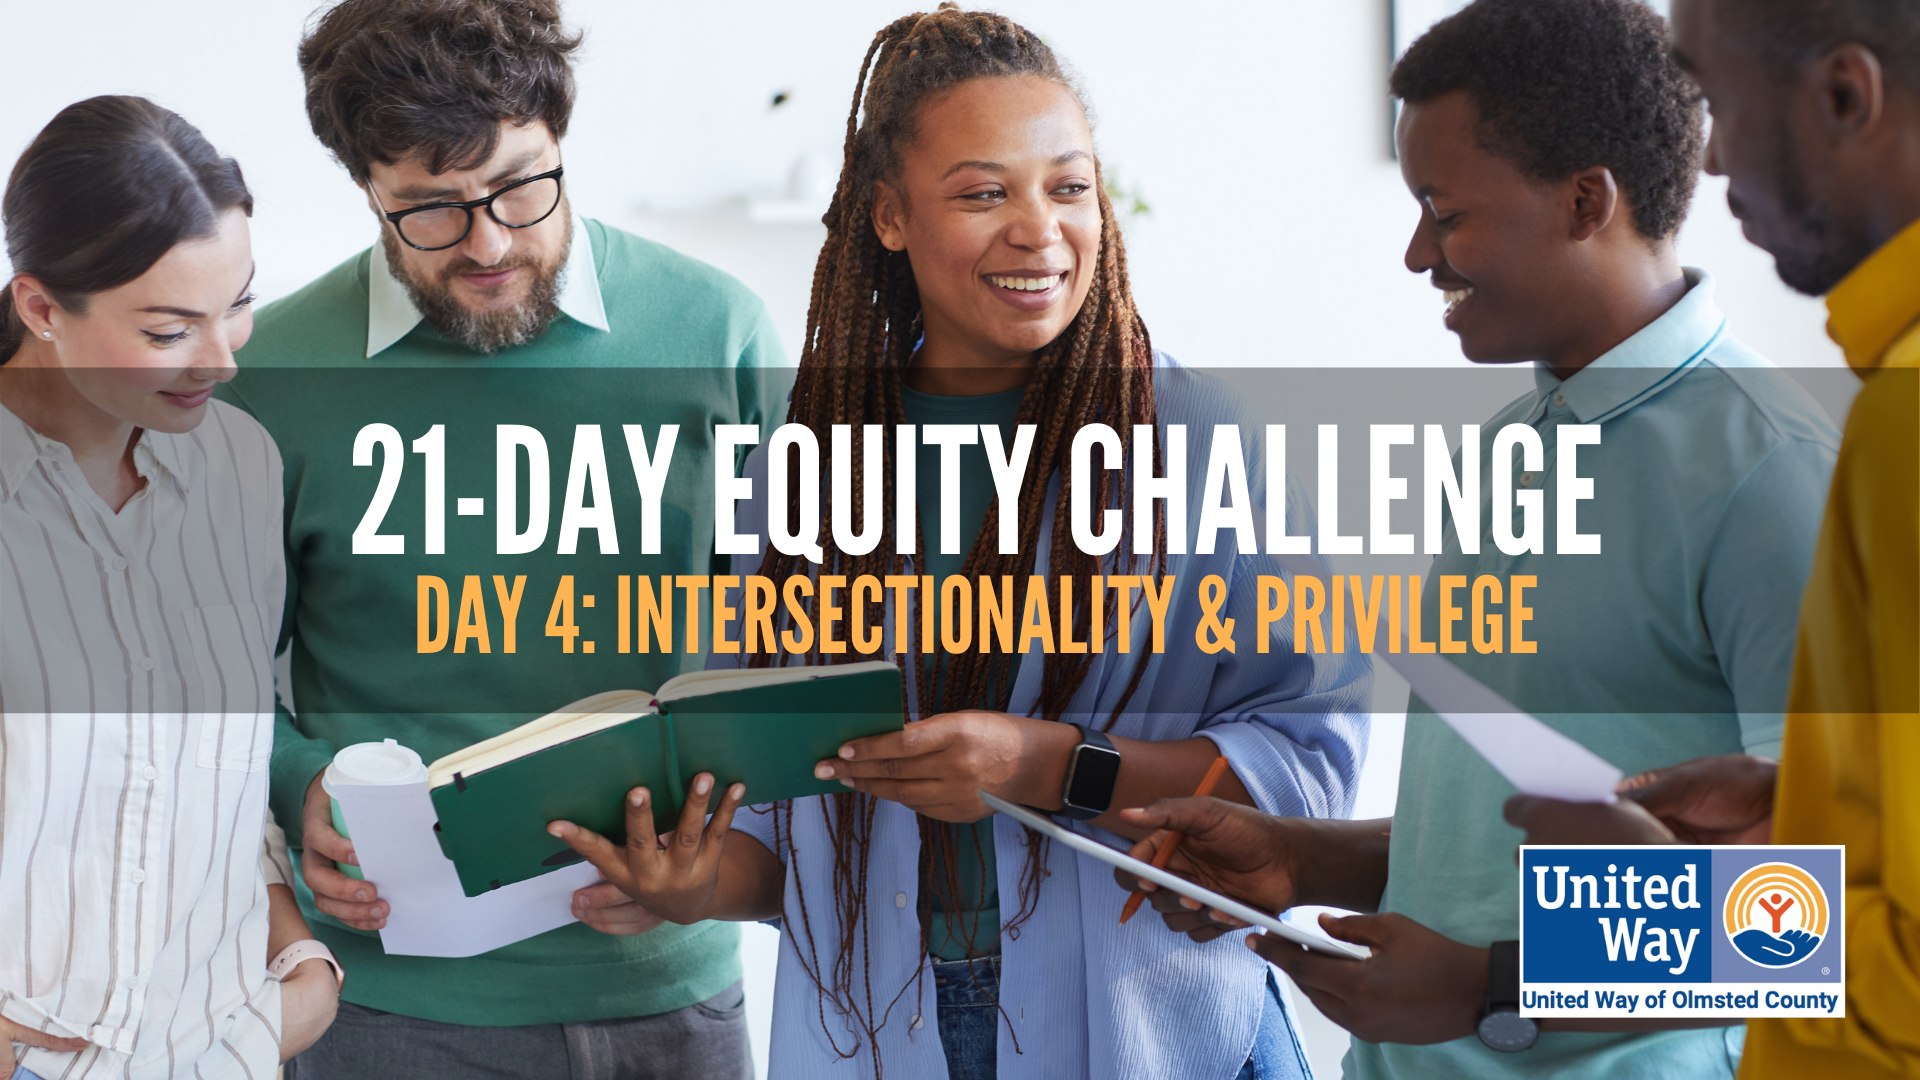 Day 4: Intersectionality & Privilege